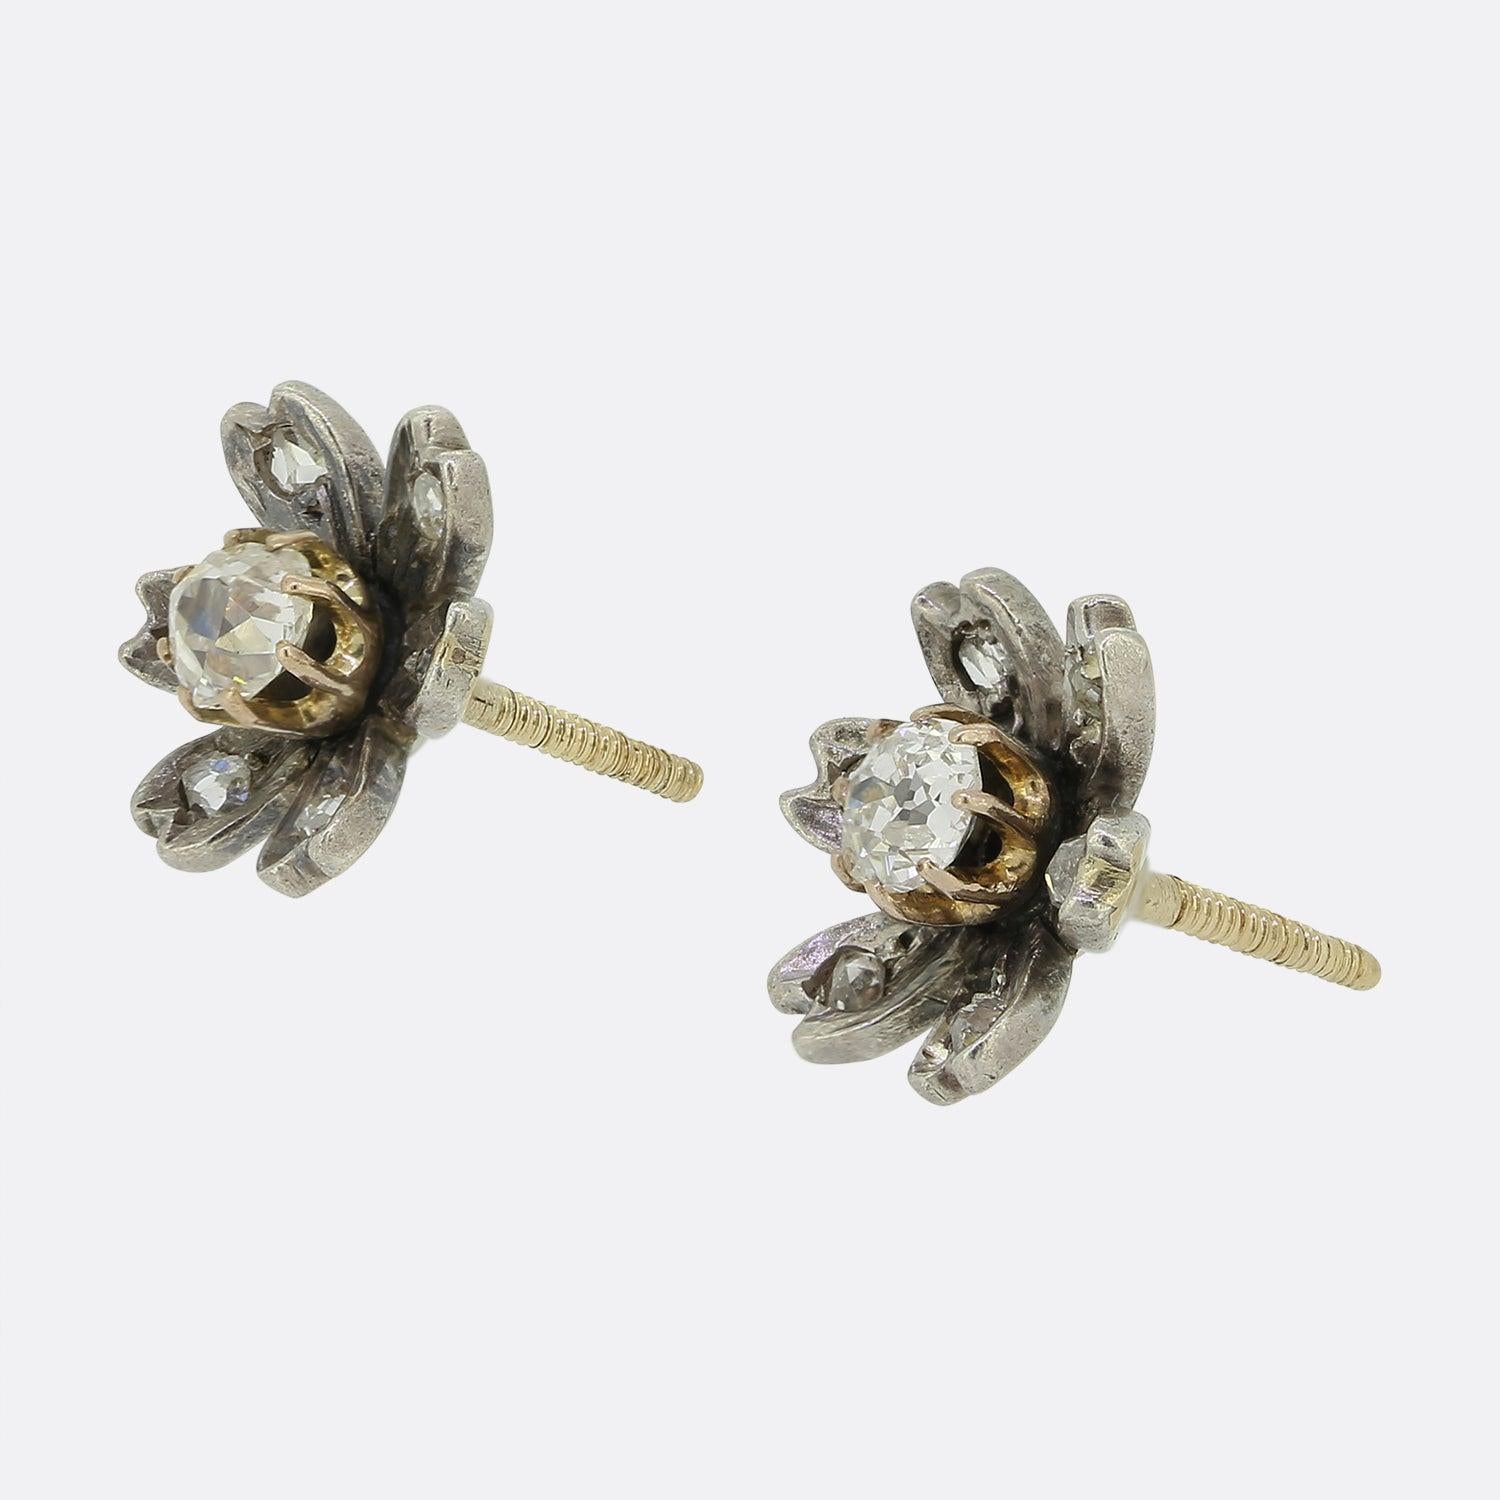 Here we have an antique pair of diamond stud earrings from the Victorian era. Each piece has been crafted from silver into the shape of a flower head with each individual petal playing host to a single rose cut diamond. A the centre of each frame we